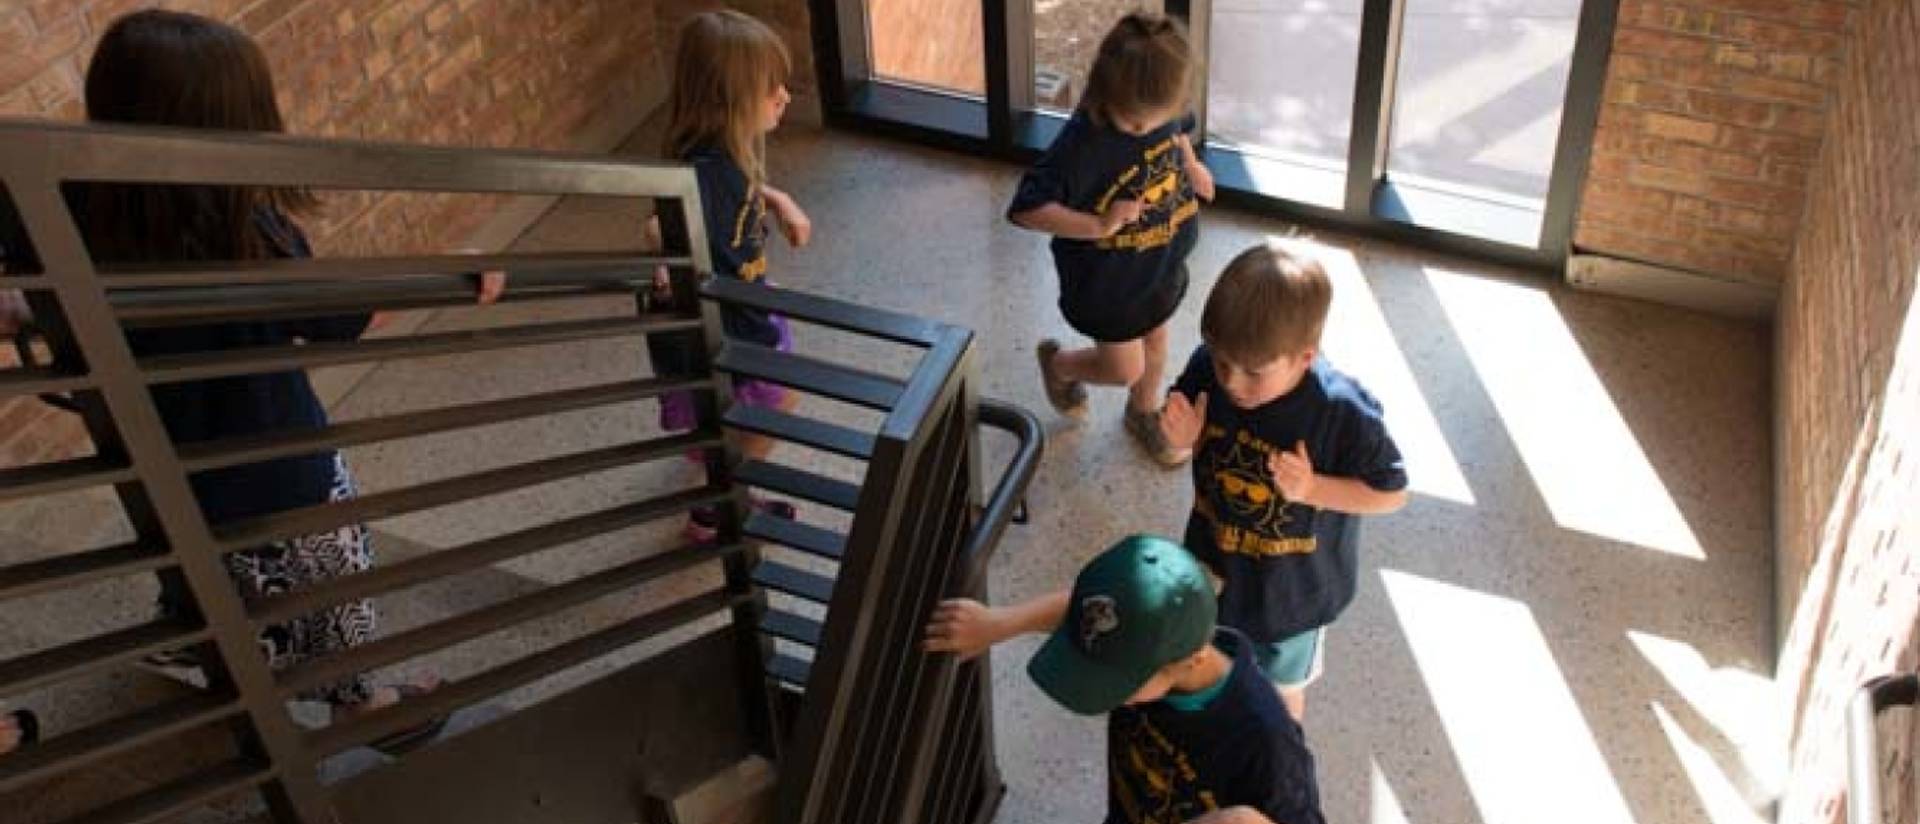 Children excitedly rush down a stairwell.